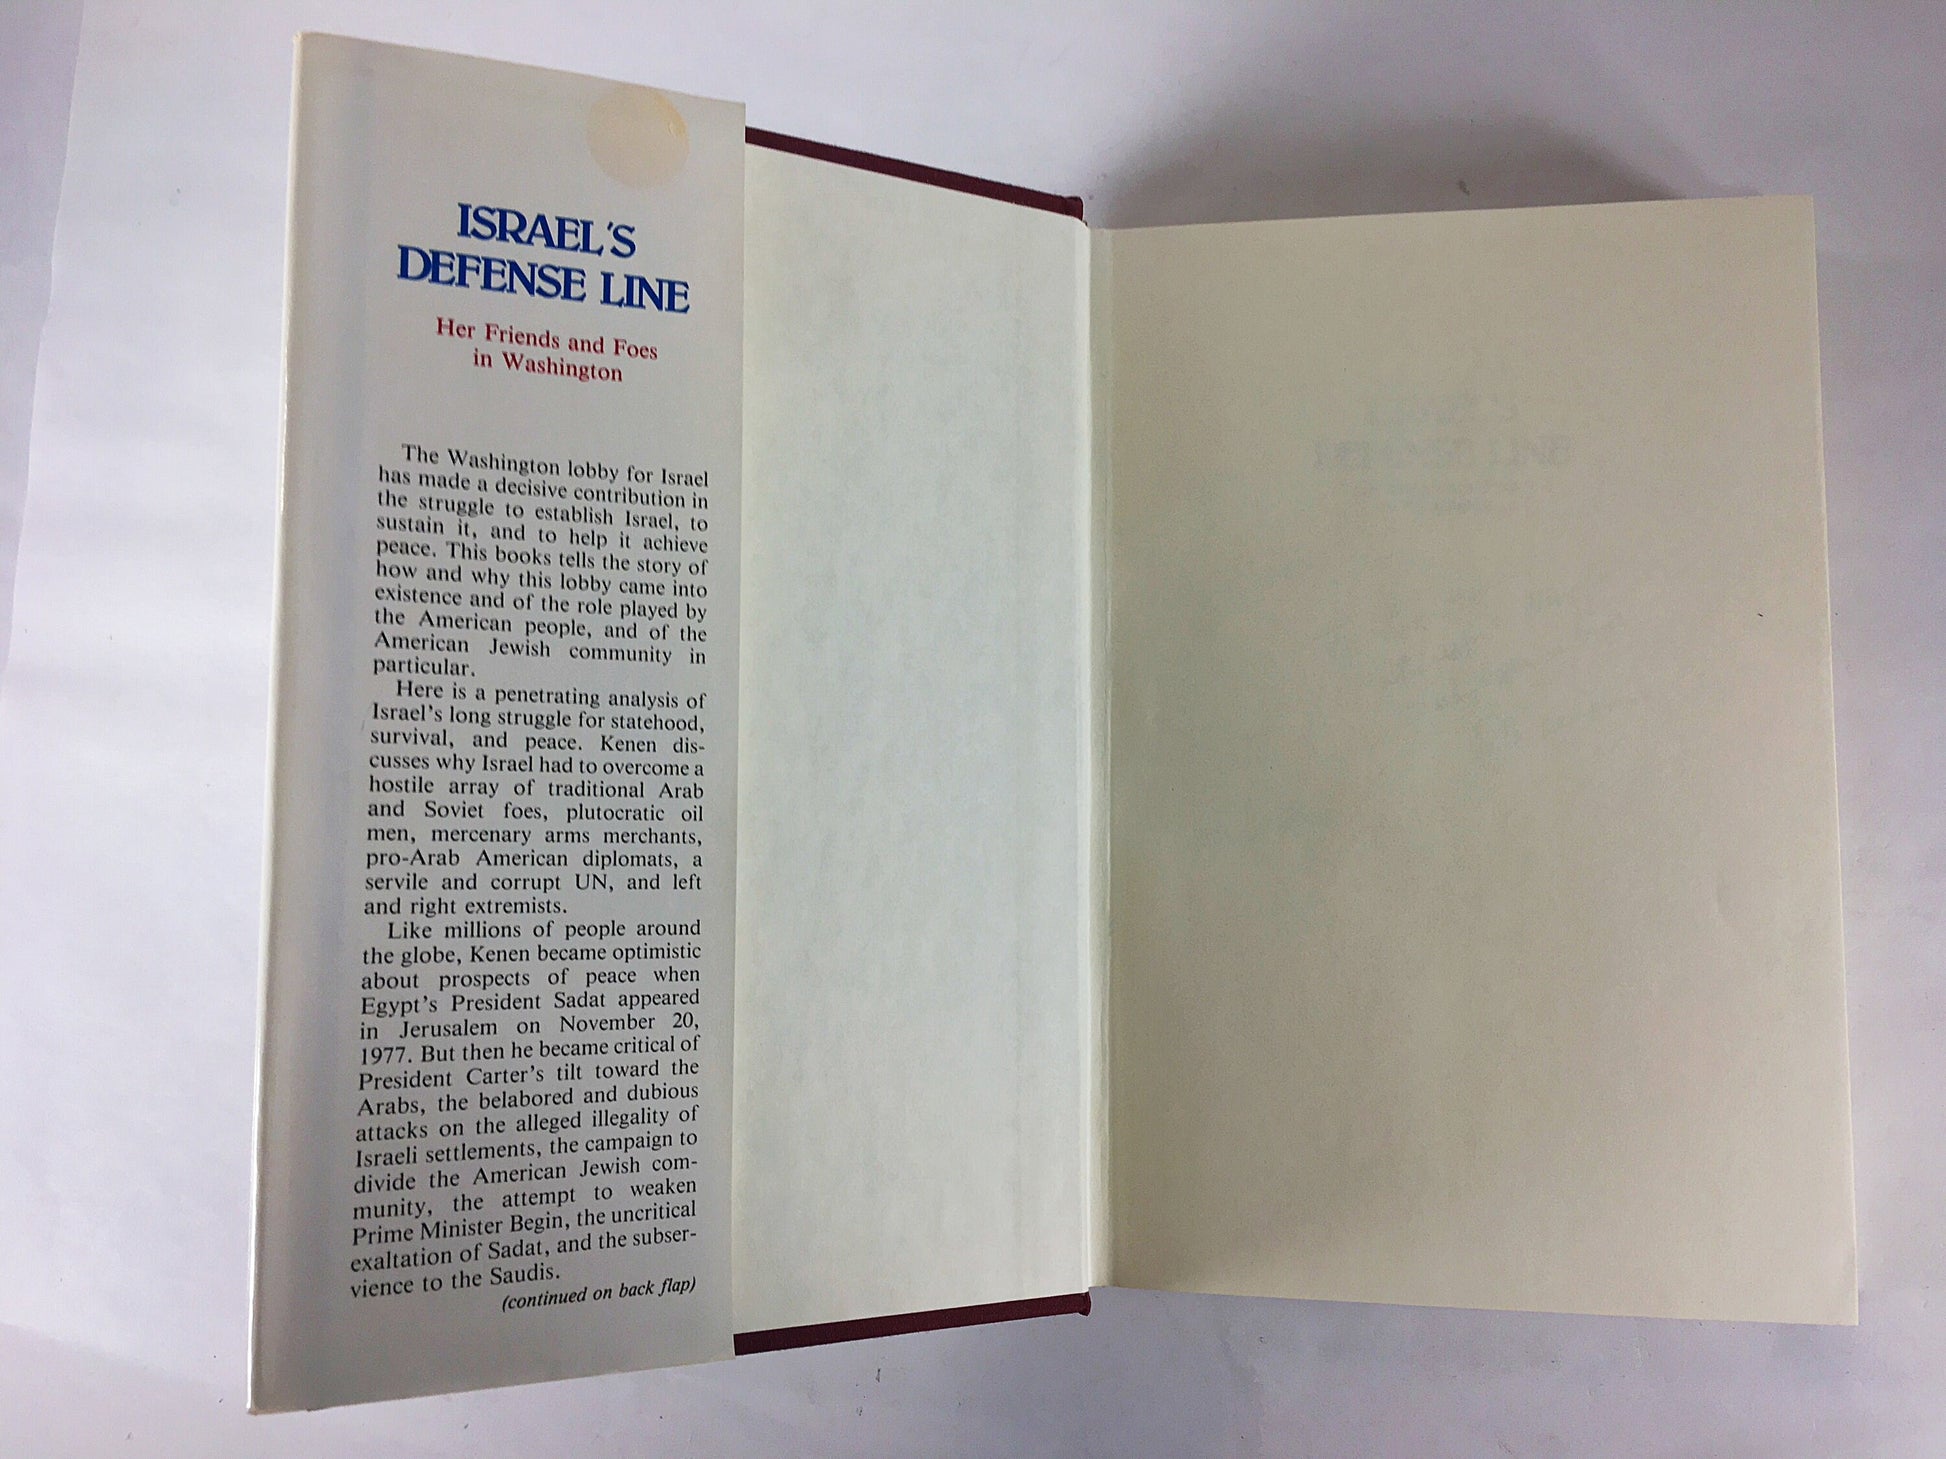 SIGNED Israel's Defense Line: Her Friends and Foes in Washington. Vintage First Edition book by IL Kenen circa 1981. International Politics